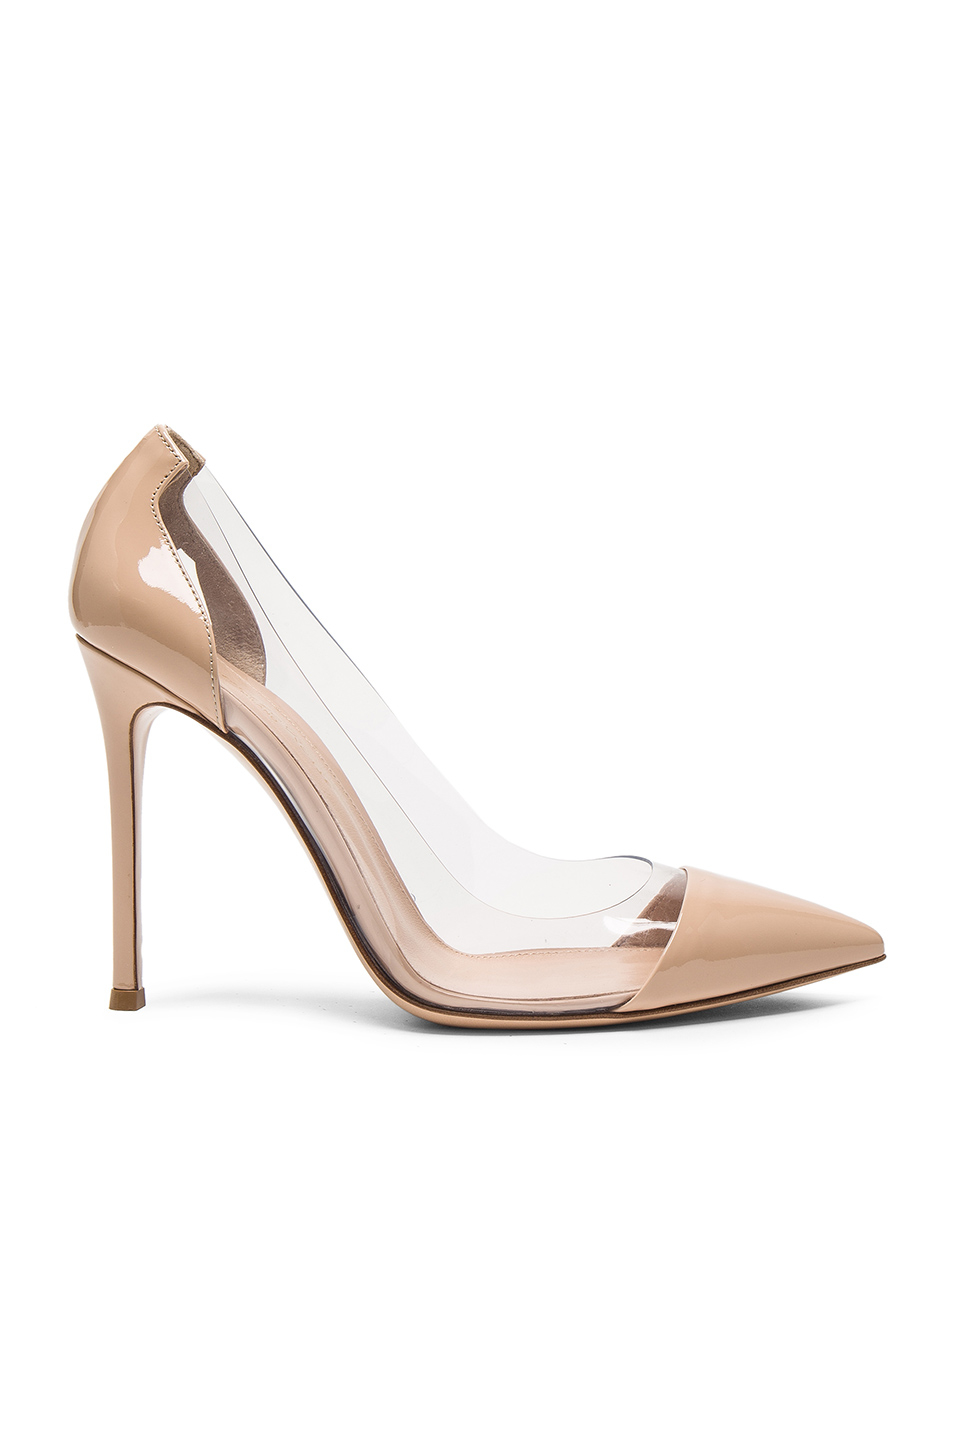 Gianvito rossi Patent Leather Plexi Court Shoes in Natural | Lyst